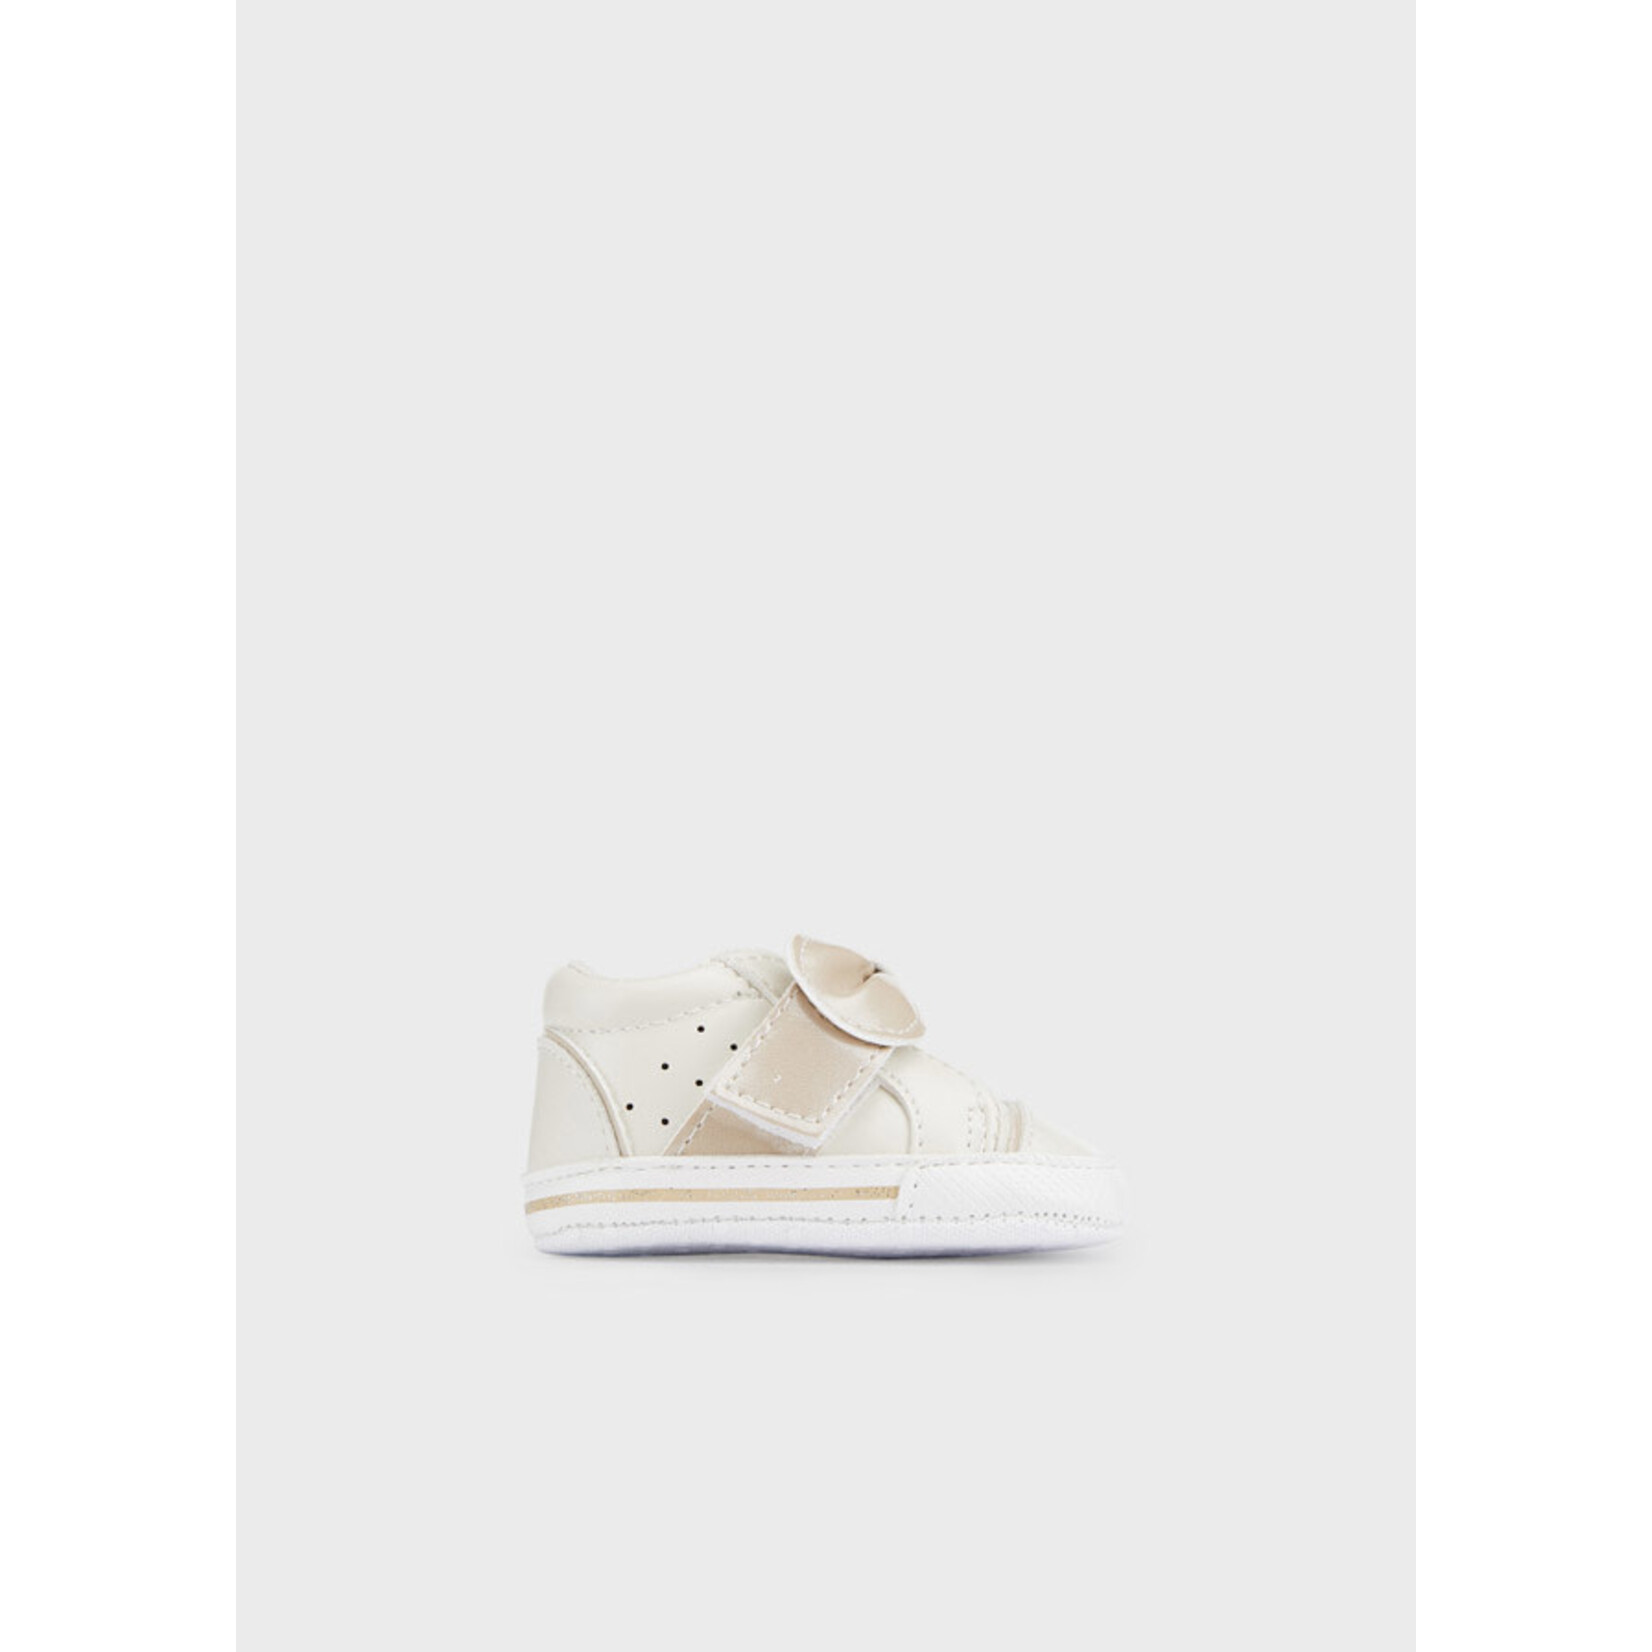 Mayoral Mayoral- Newborn- Velcro Bow Sneaker Shoes